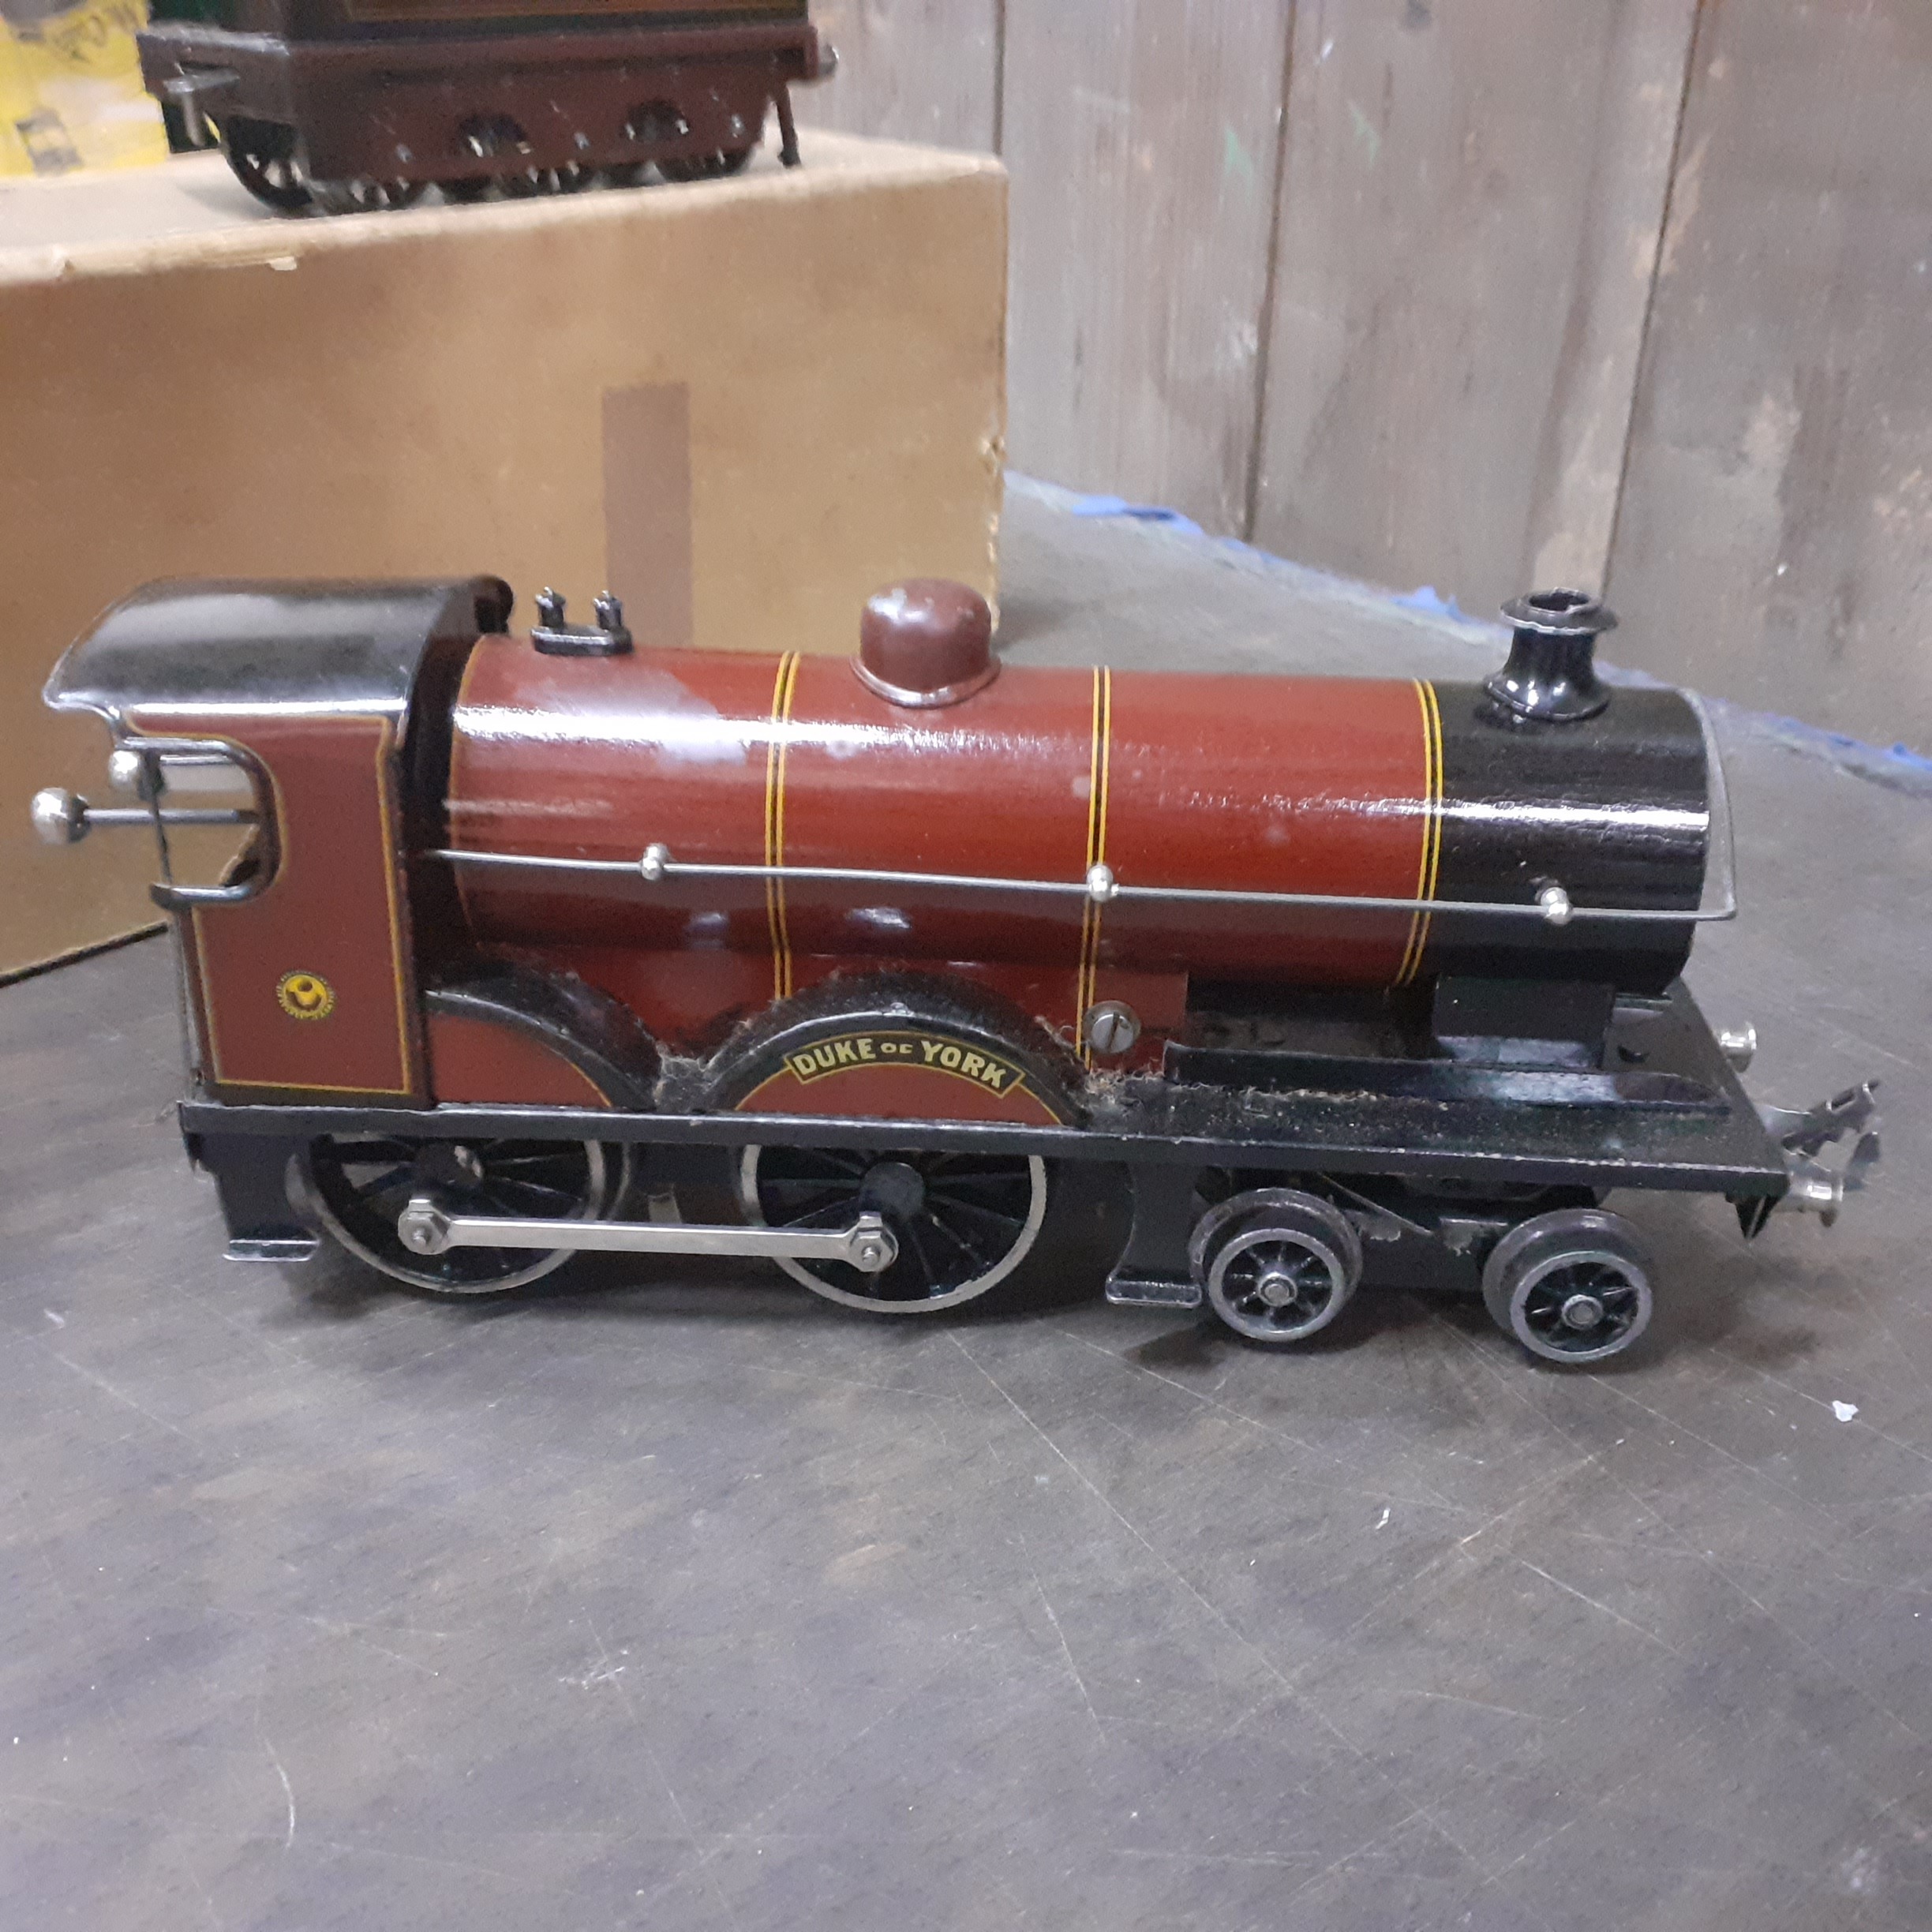 You are currently viewing Going Lowko over Basset-Lowkes O Gauge ‘Duke of York